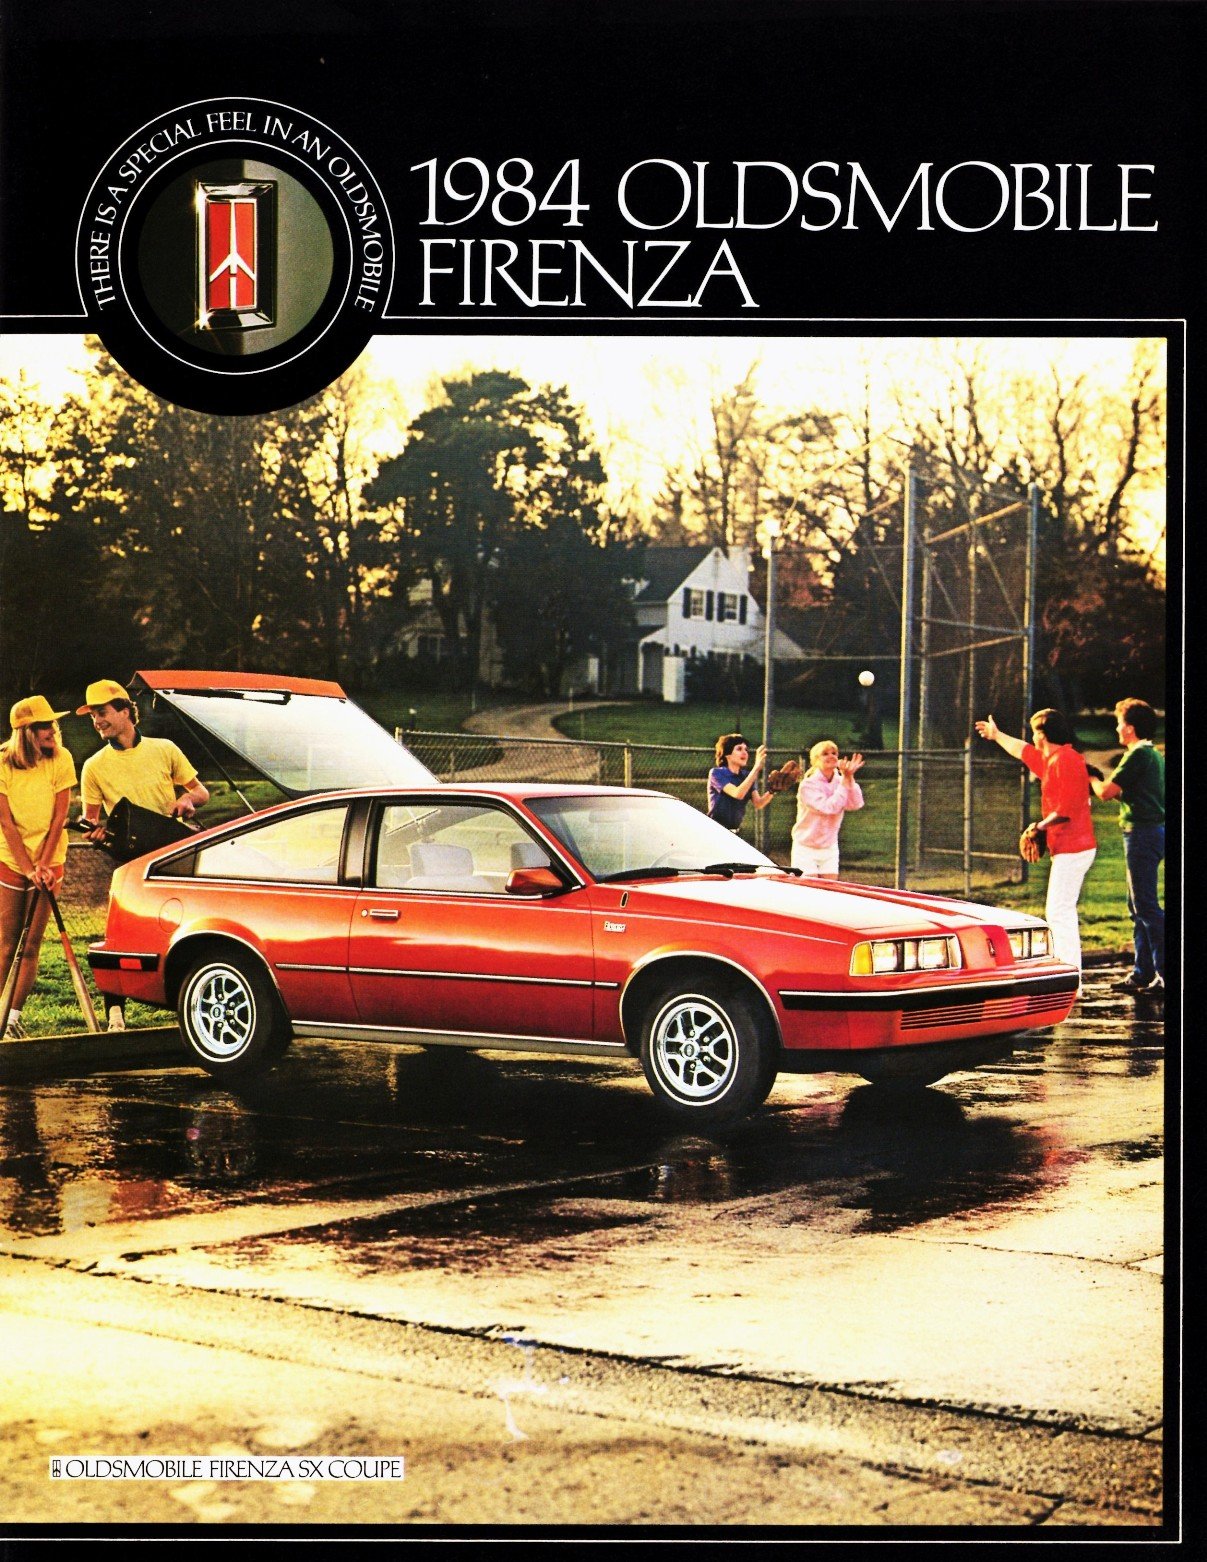 1984 Oldsmobile Firenza SX Coupe | Flickr - Photo Sharing!